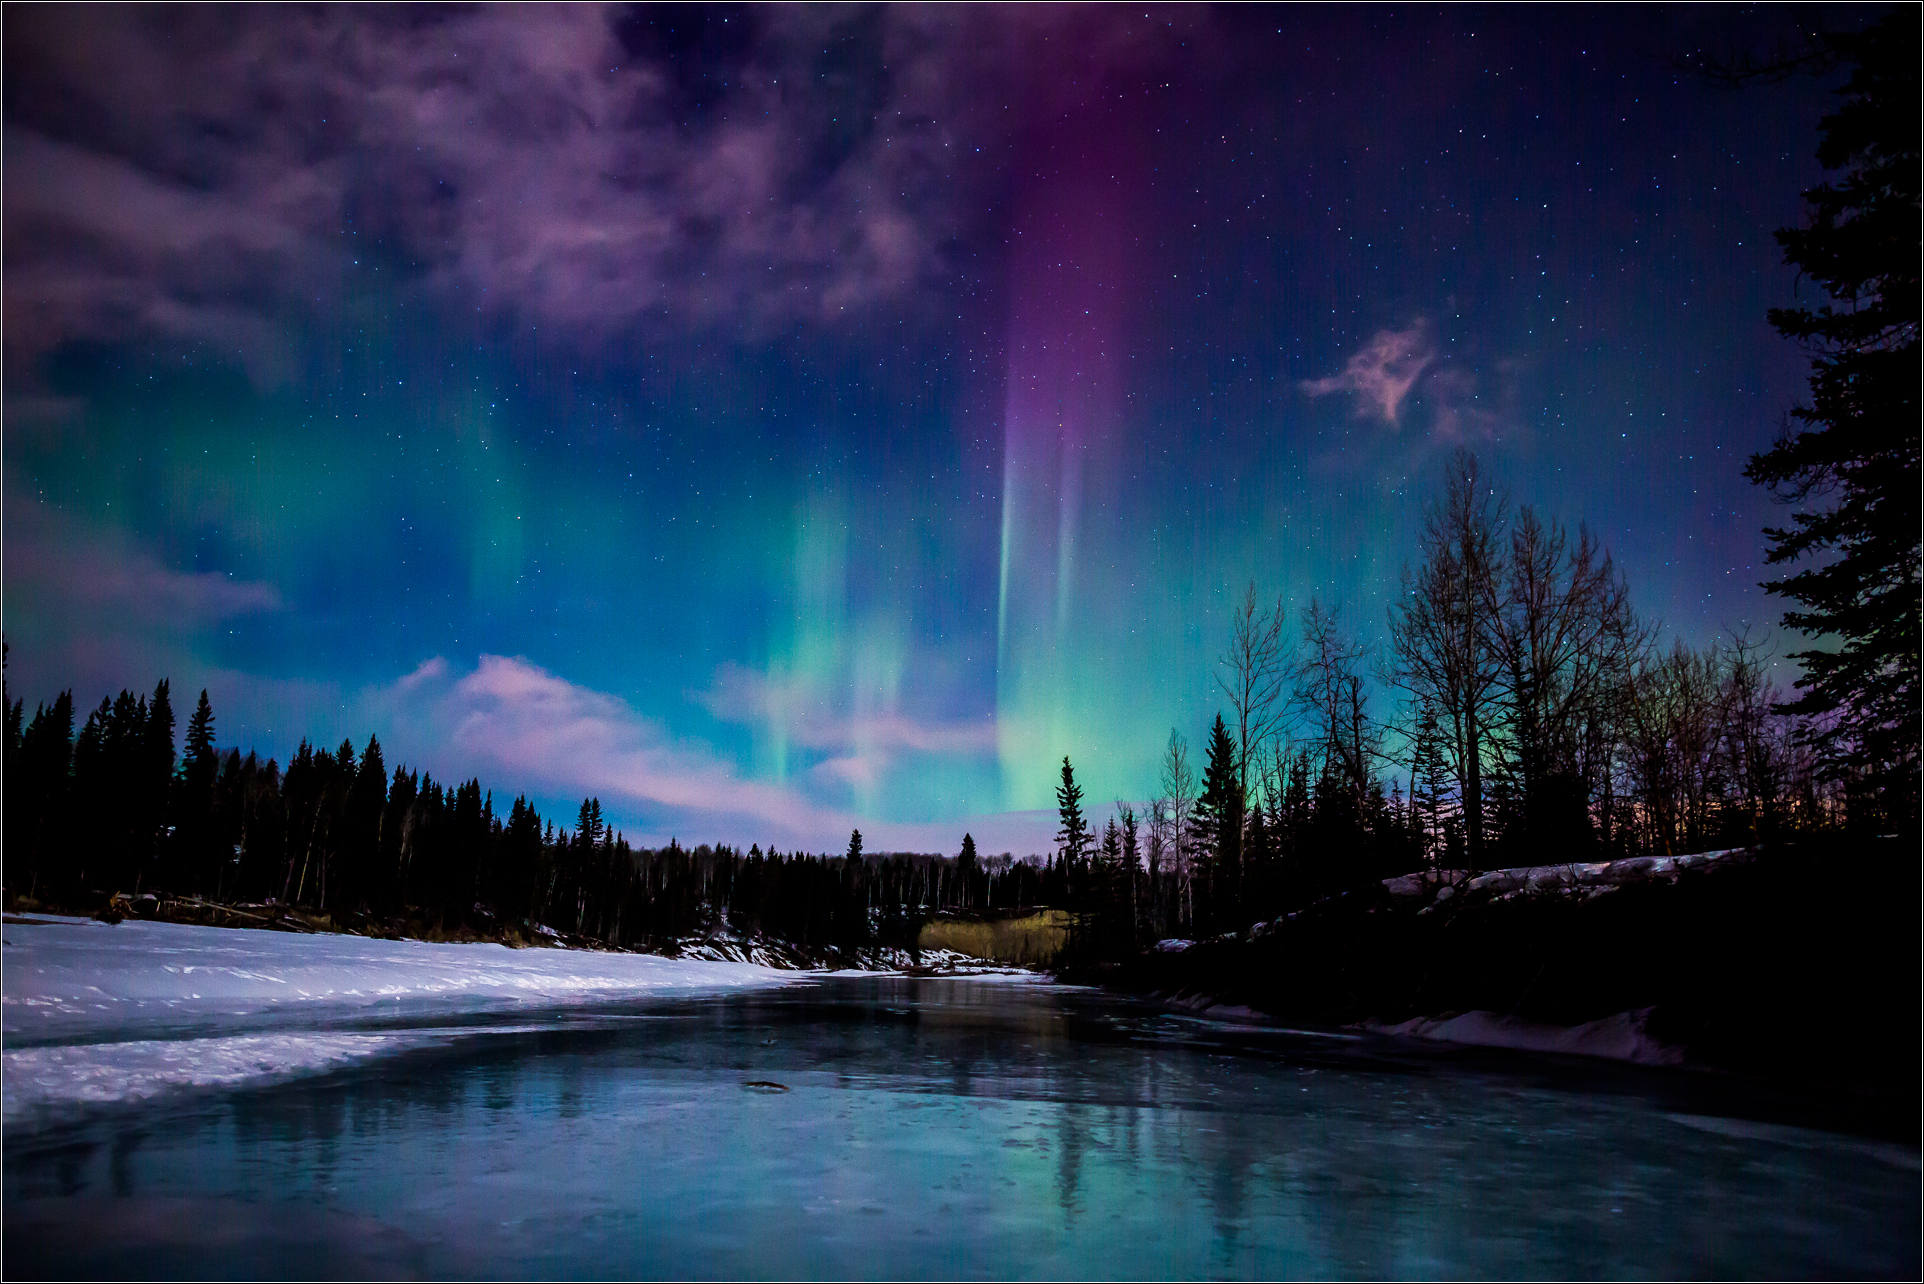 Aurora Borealis Over The Elbow River Image Id 162333 Image Abyss